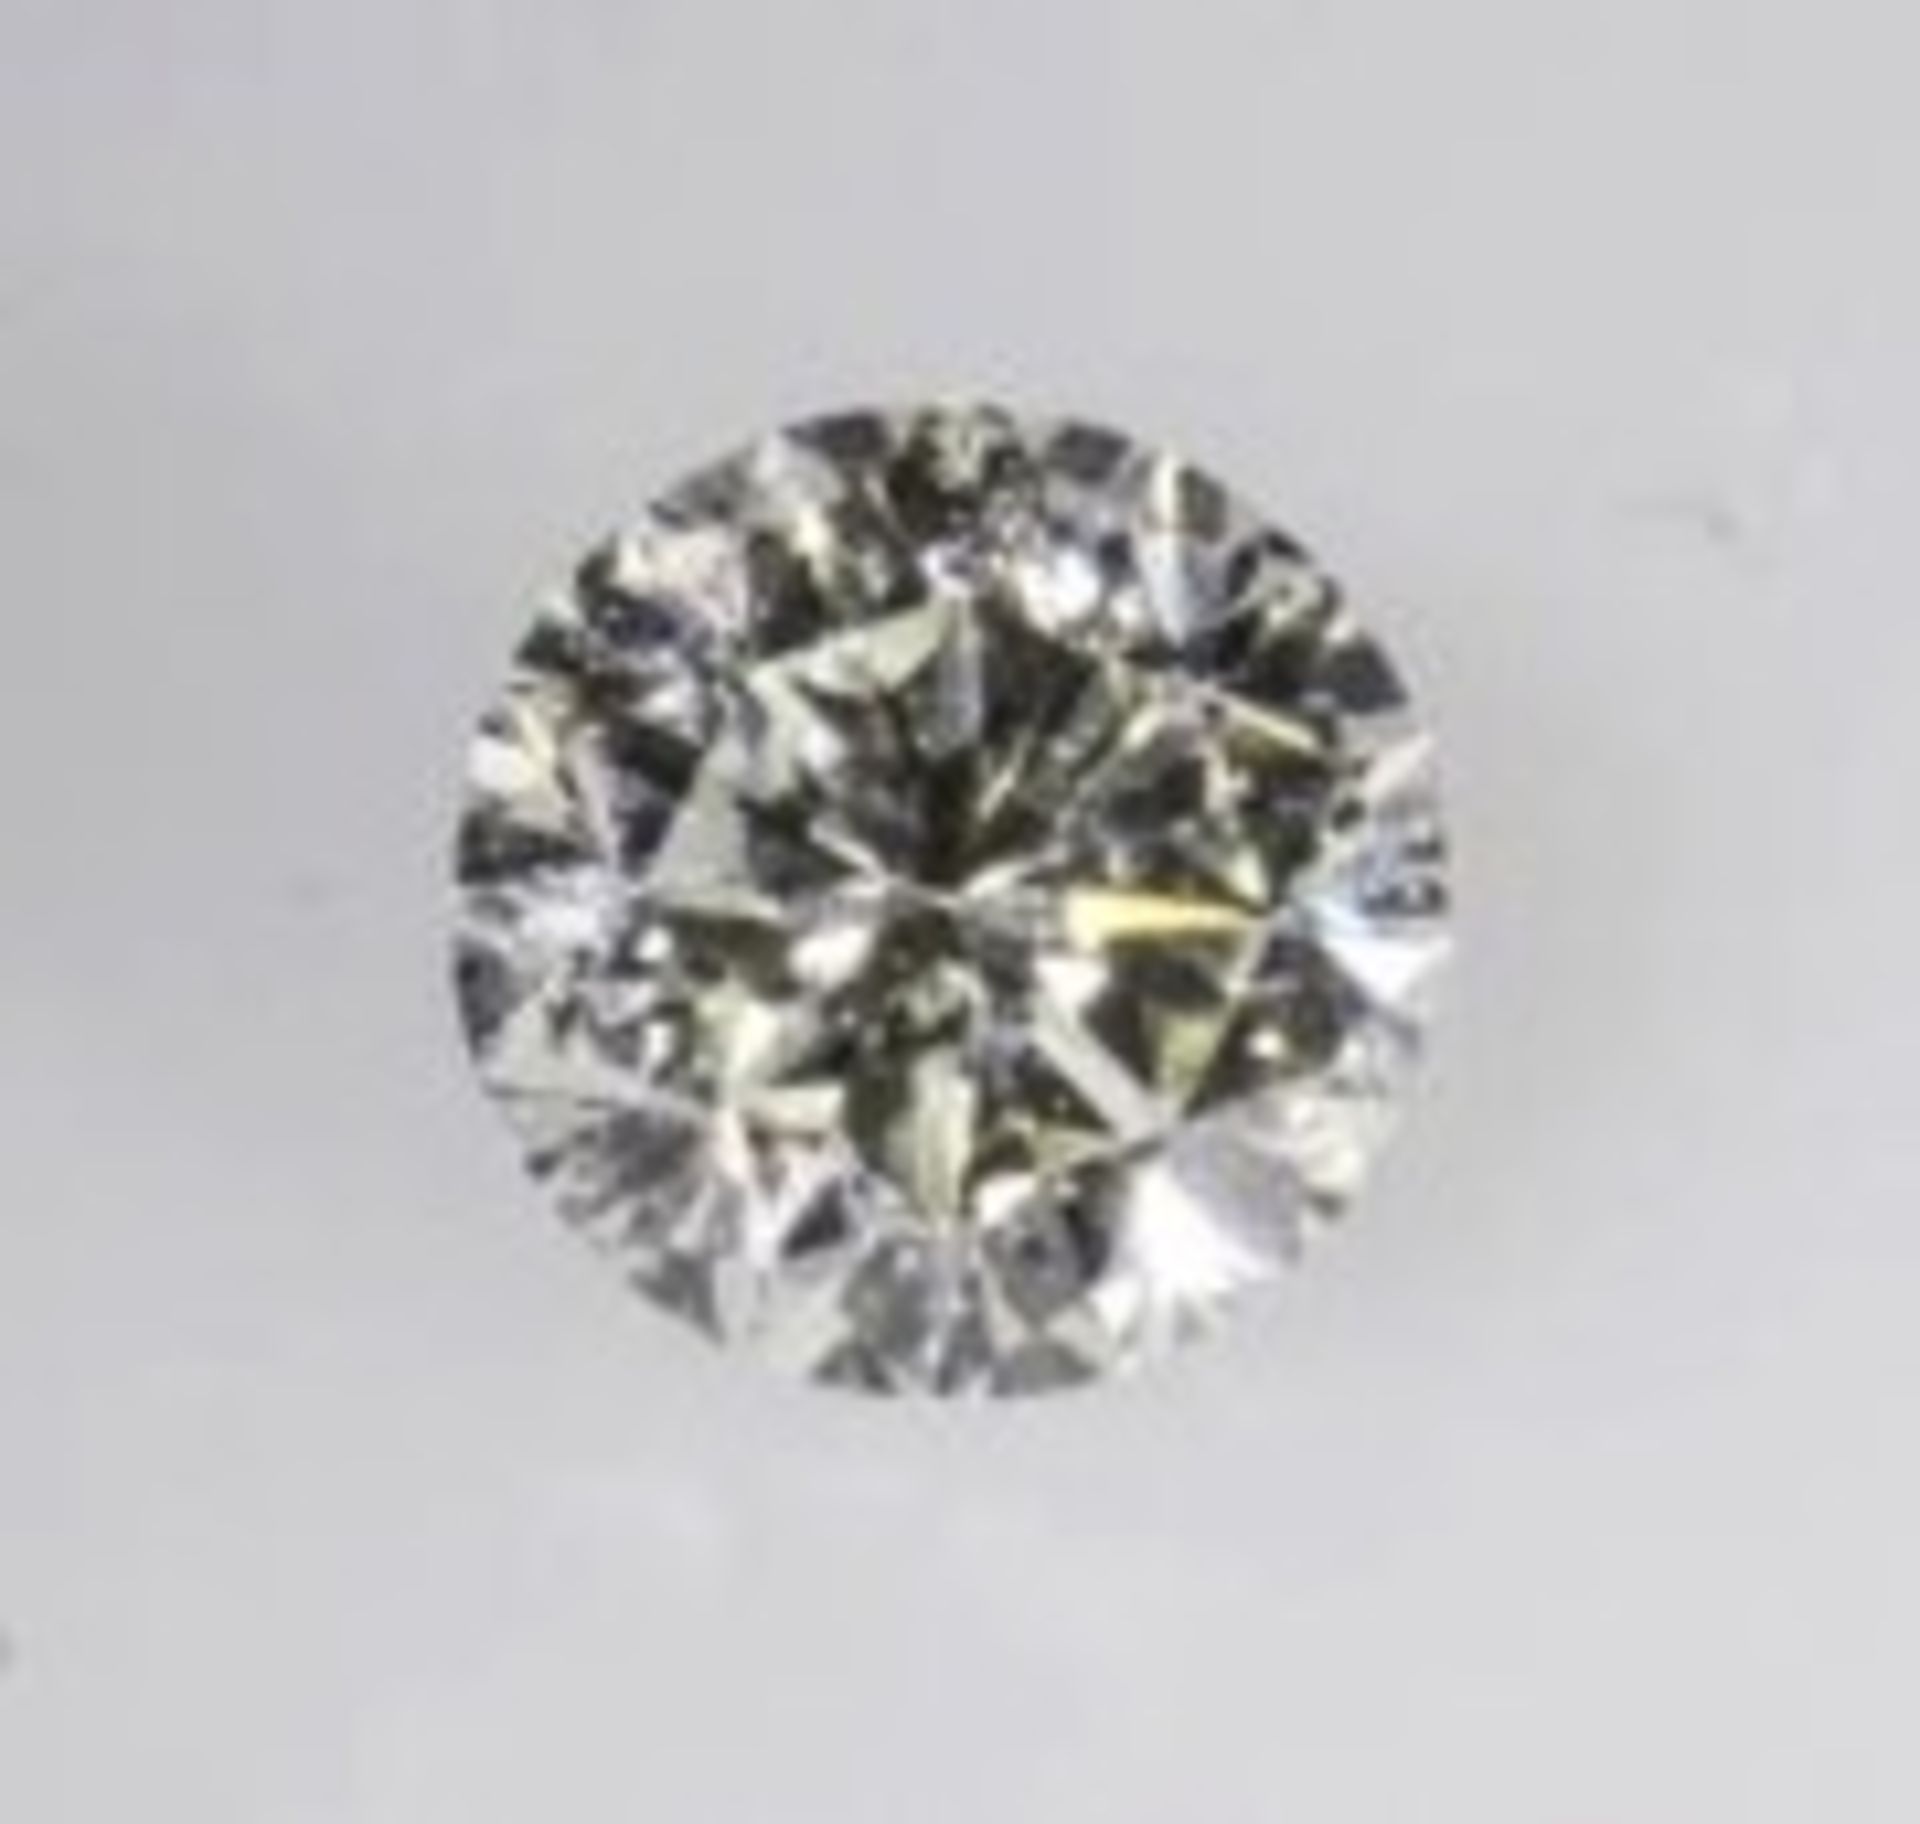 A 0.20 Carat round, brilliant cut diamond. Please add £4.10 to final hammer price for postage &